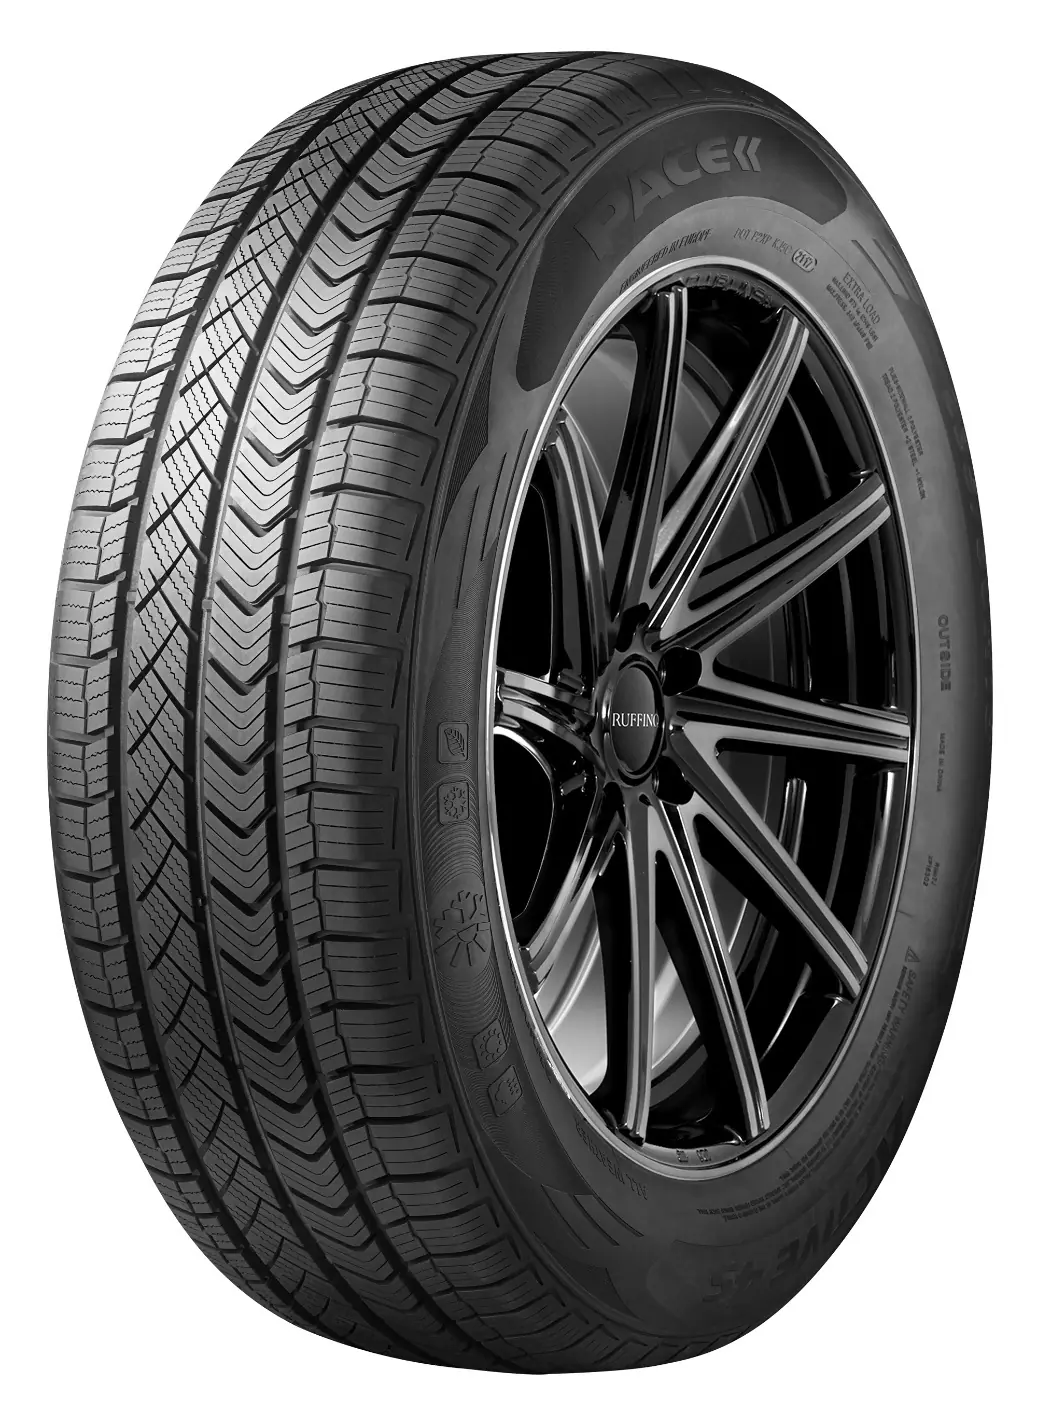 Pace Pace 215/55 R17 98W ACTIVE 4S XL pneumatici nuovi All Season 